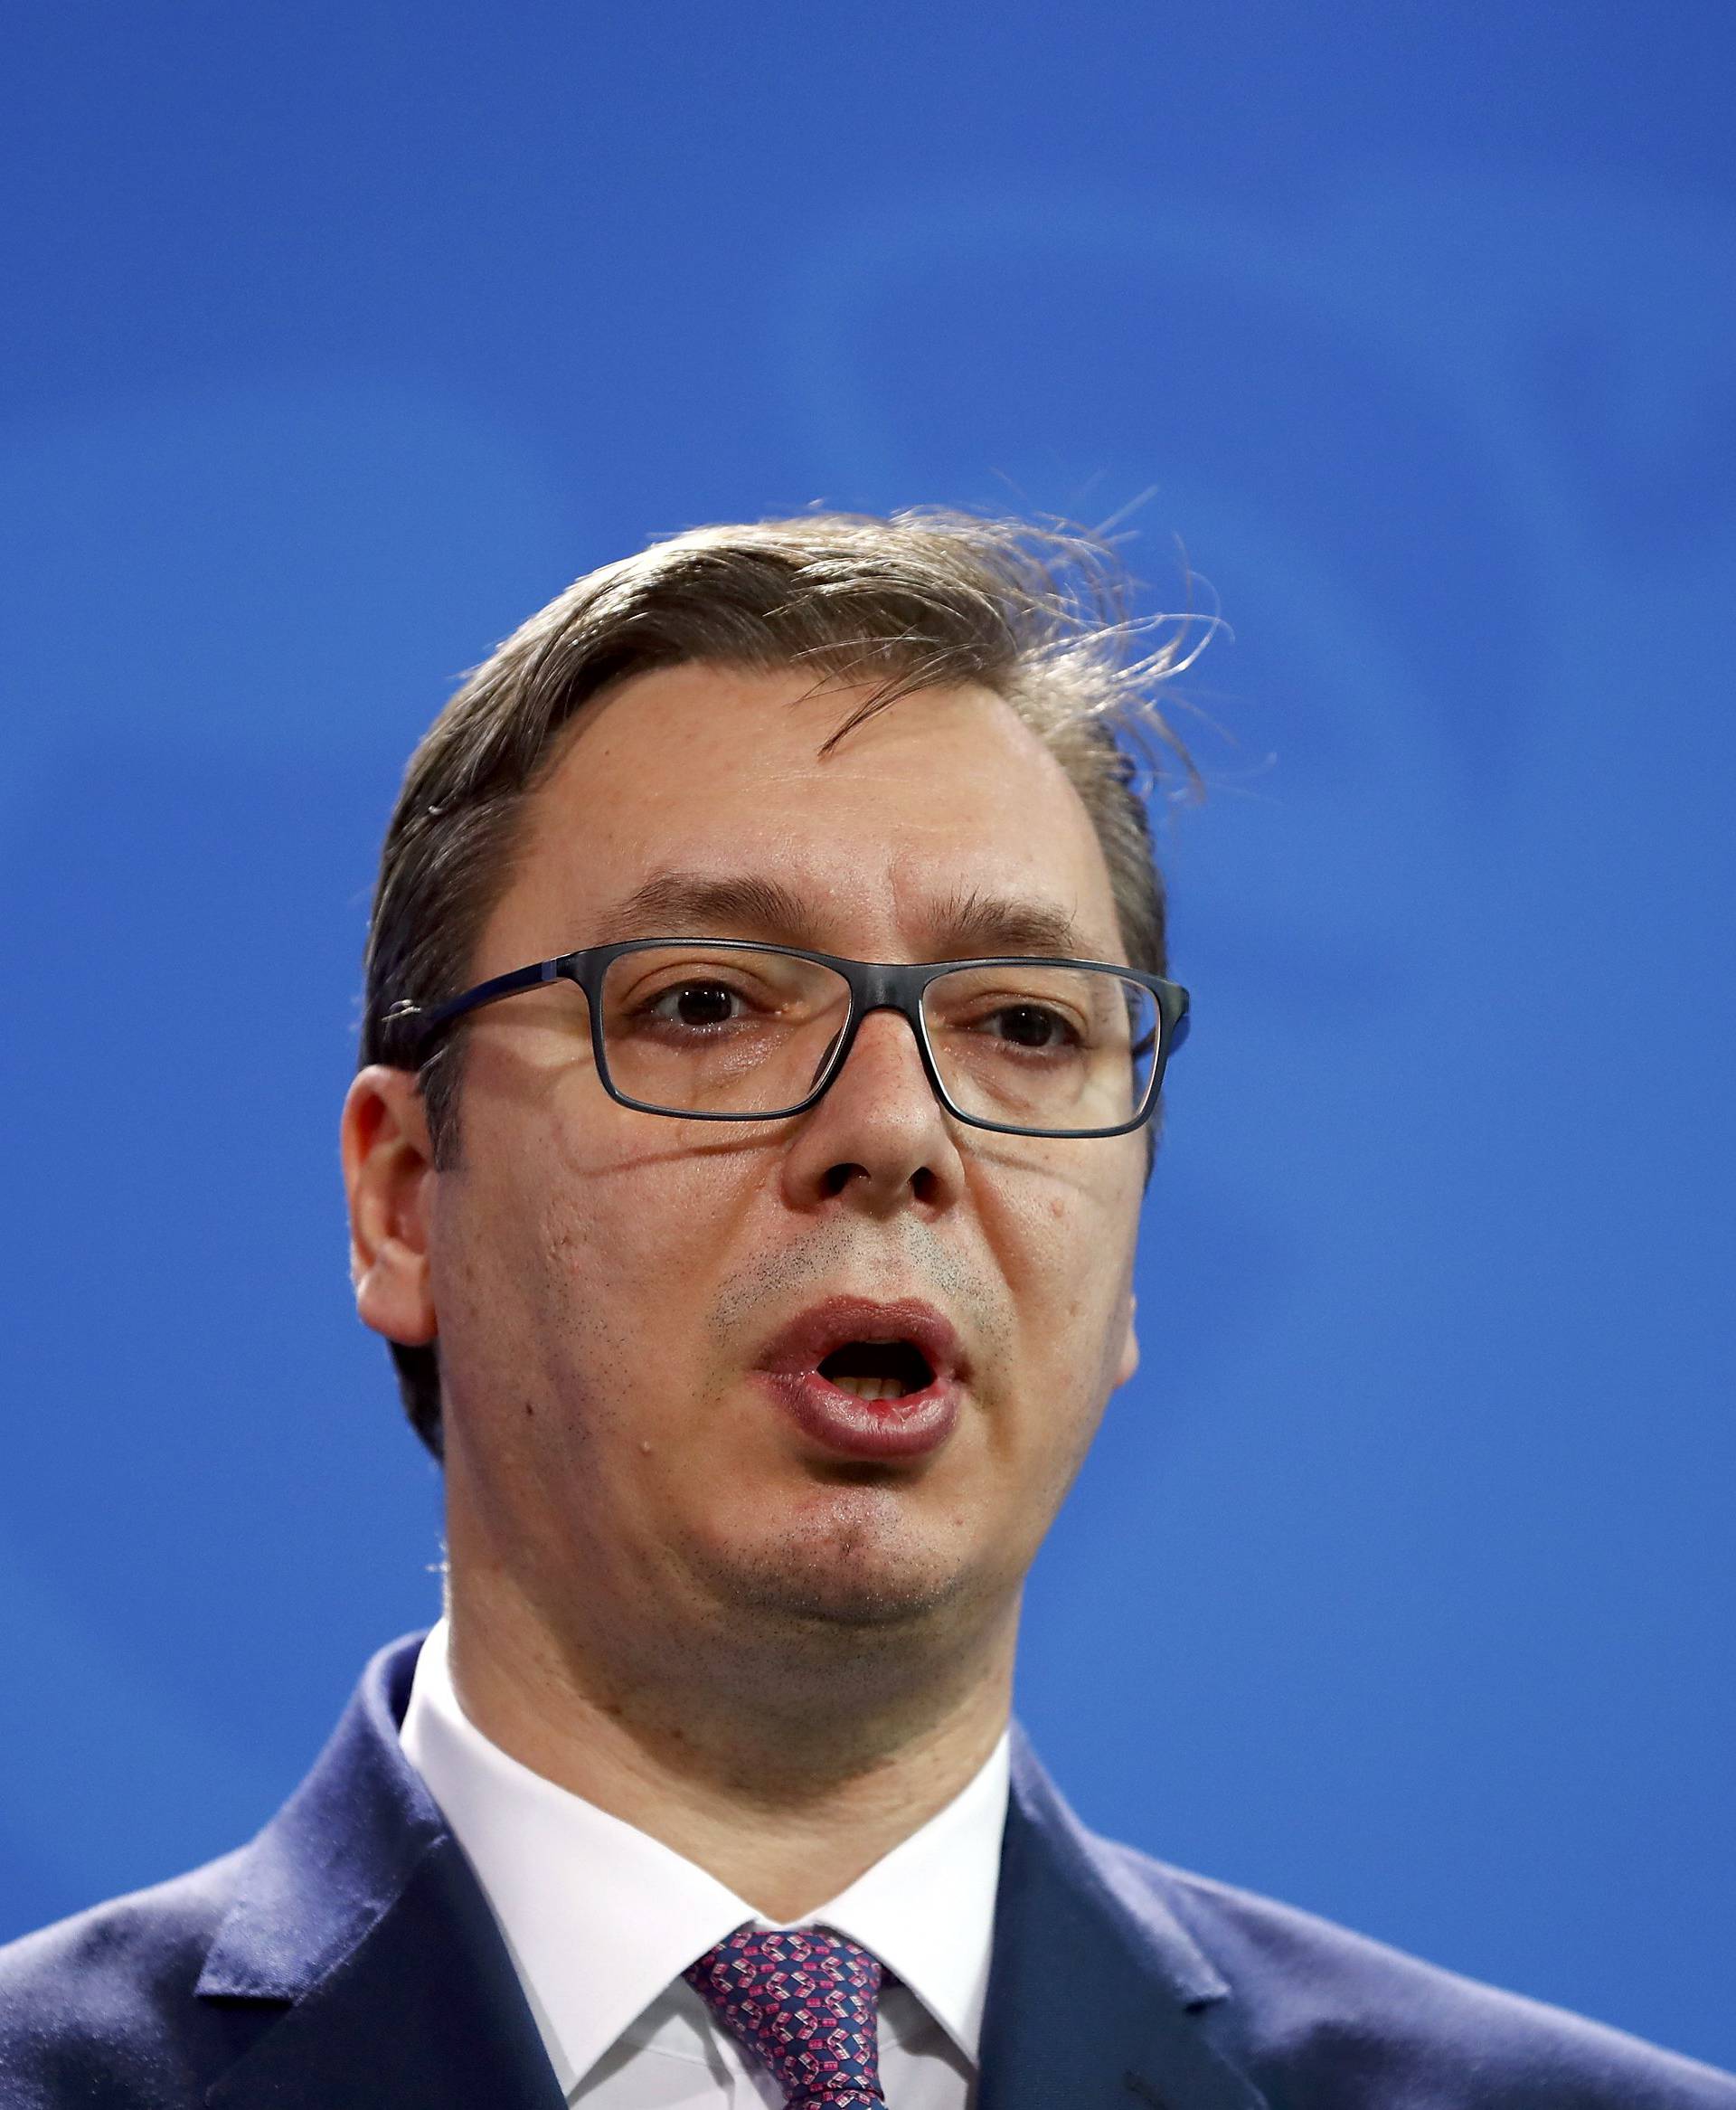 Serbian Prime Minister Aleksandar Vucic gives a statement before talks with German Chancellor Angela Merkel at the Chancellery in Berlin